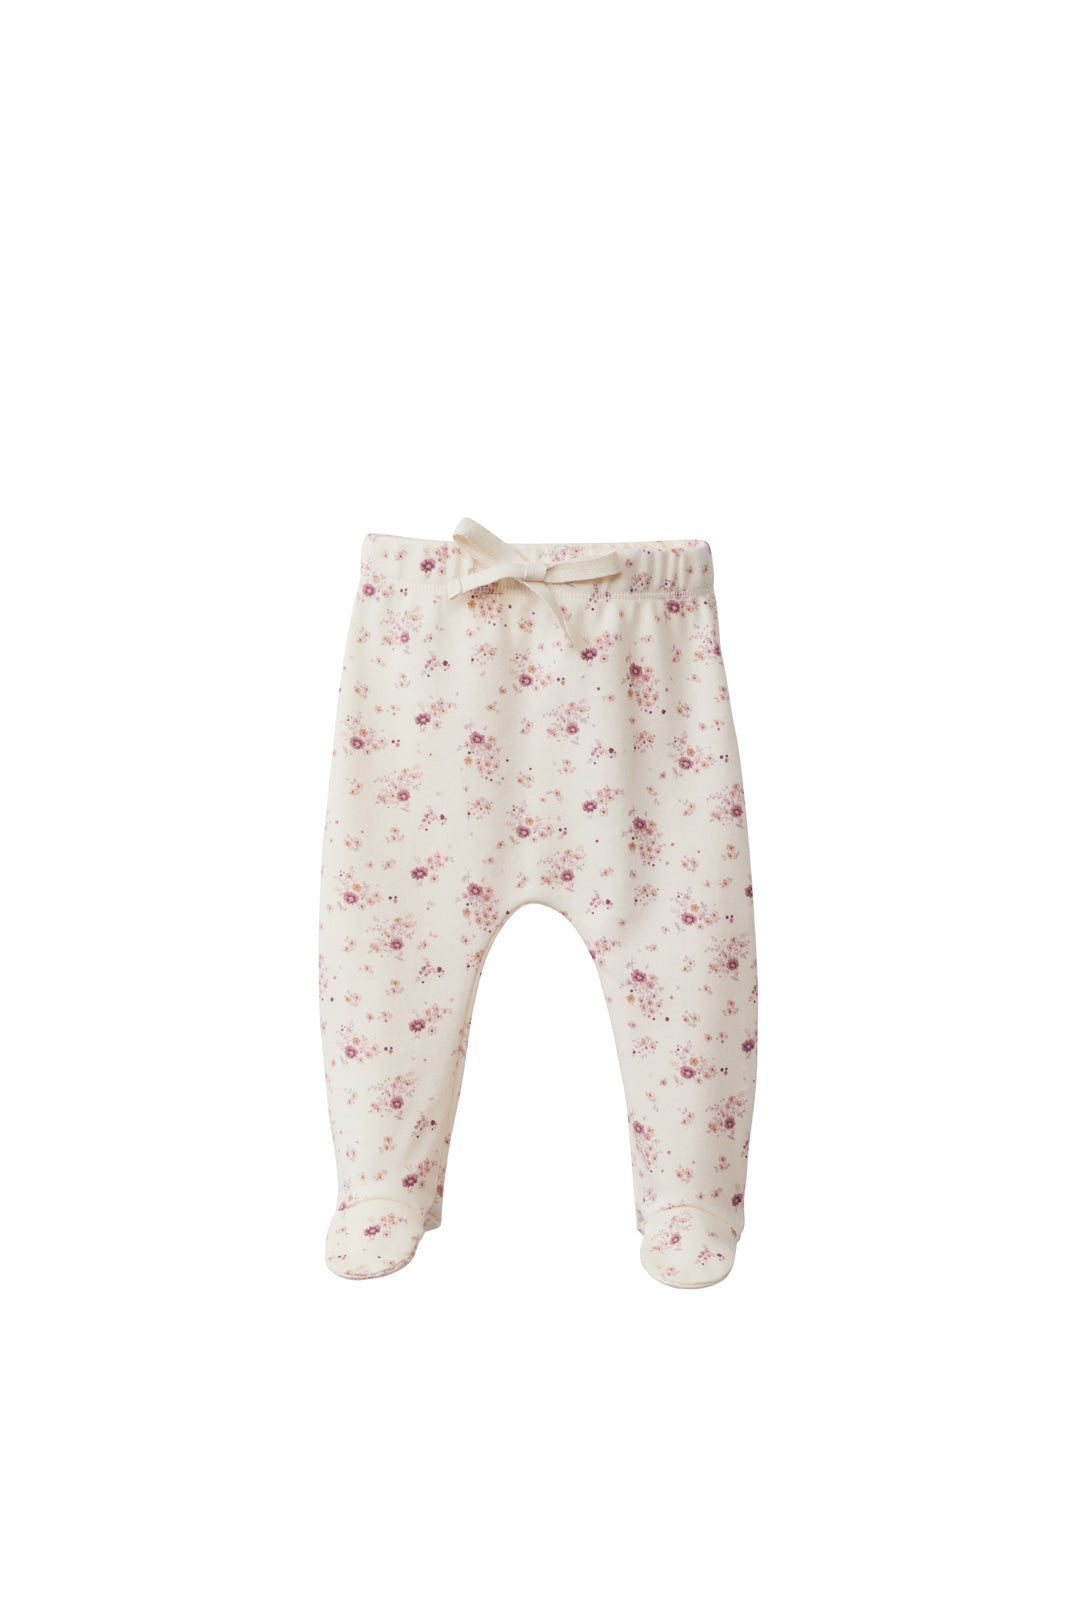 Organic Cotton Footed Pant - Forget Me Not